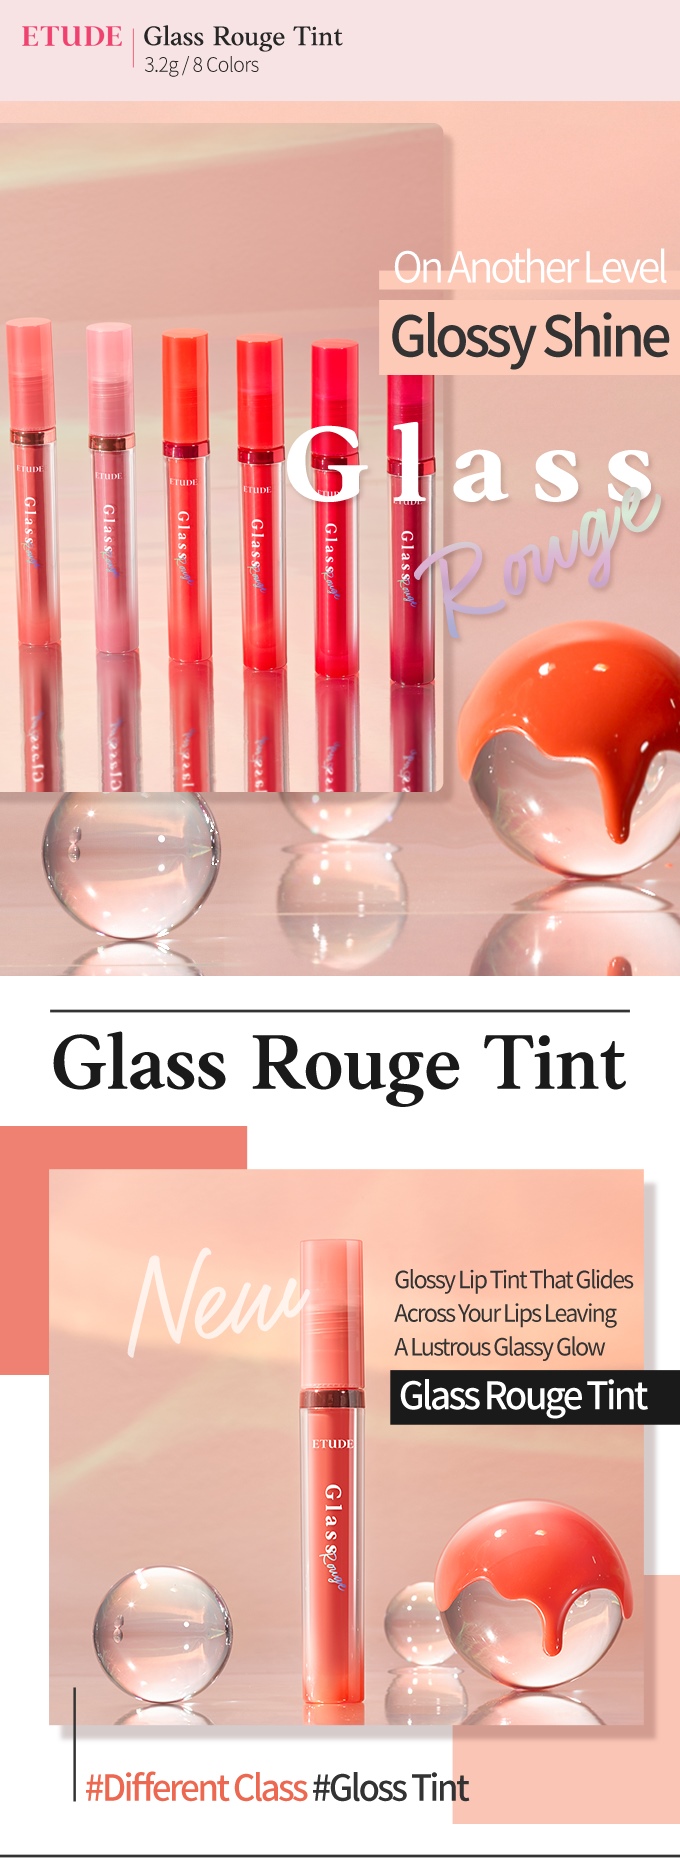 Glass Rouge Tint